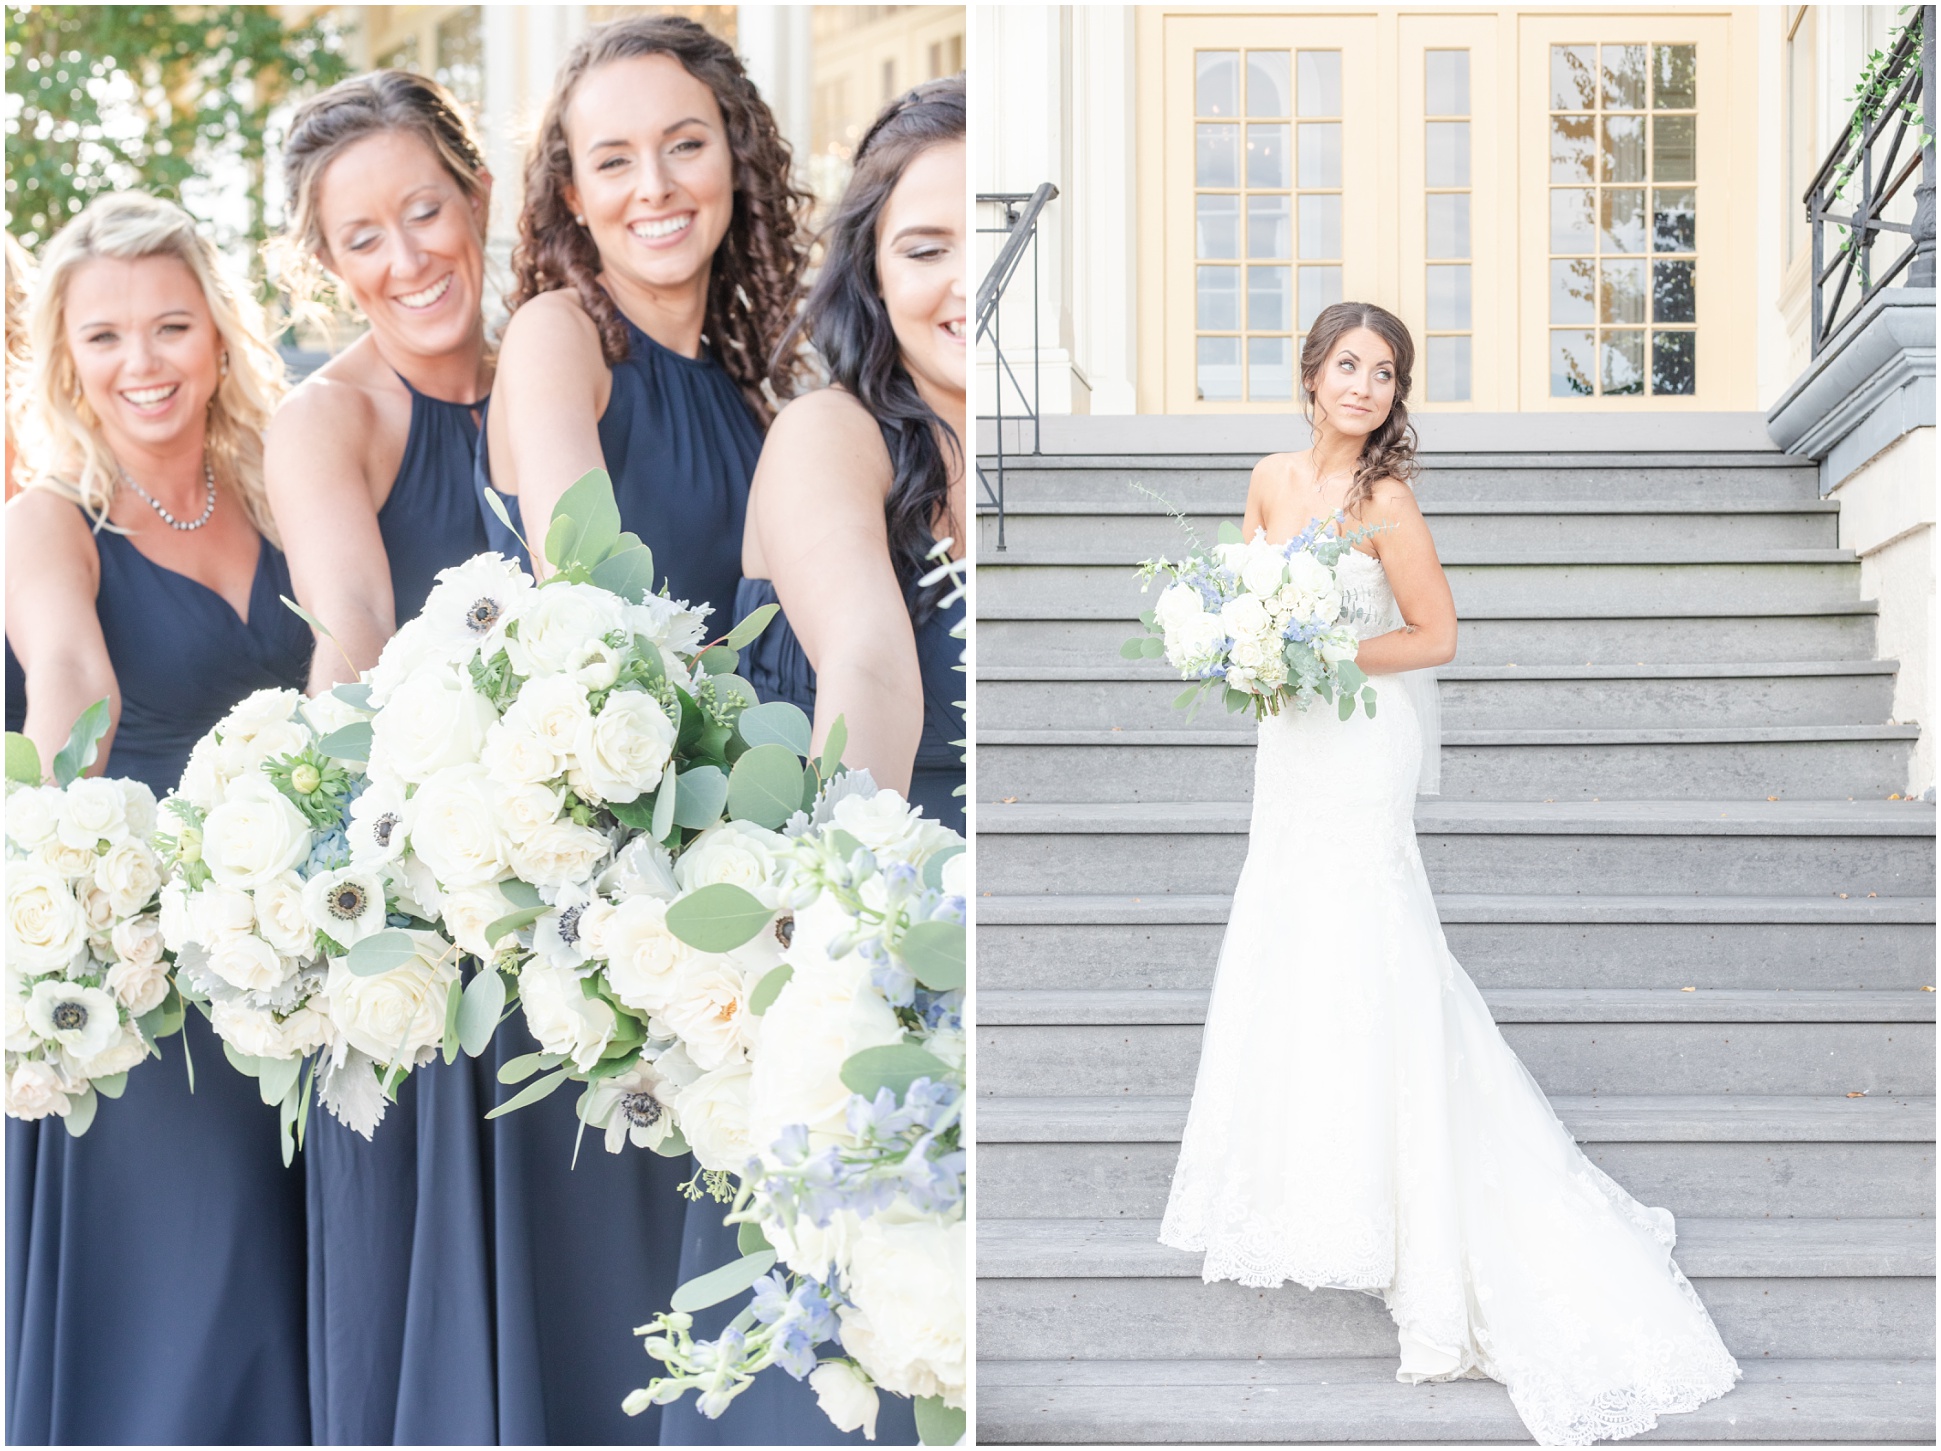 Left: Bridesmaids holding out their bouquets, Right: Bride standing on the steps looking over her shoulder